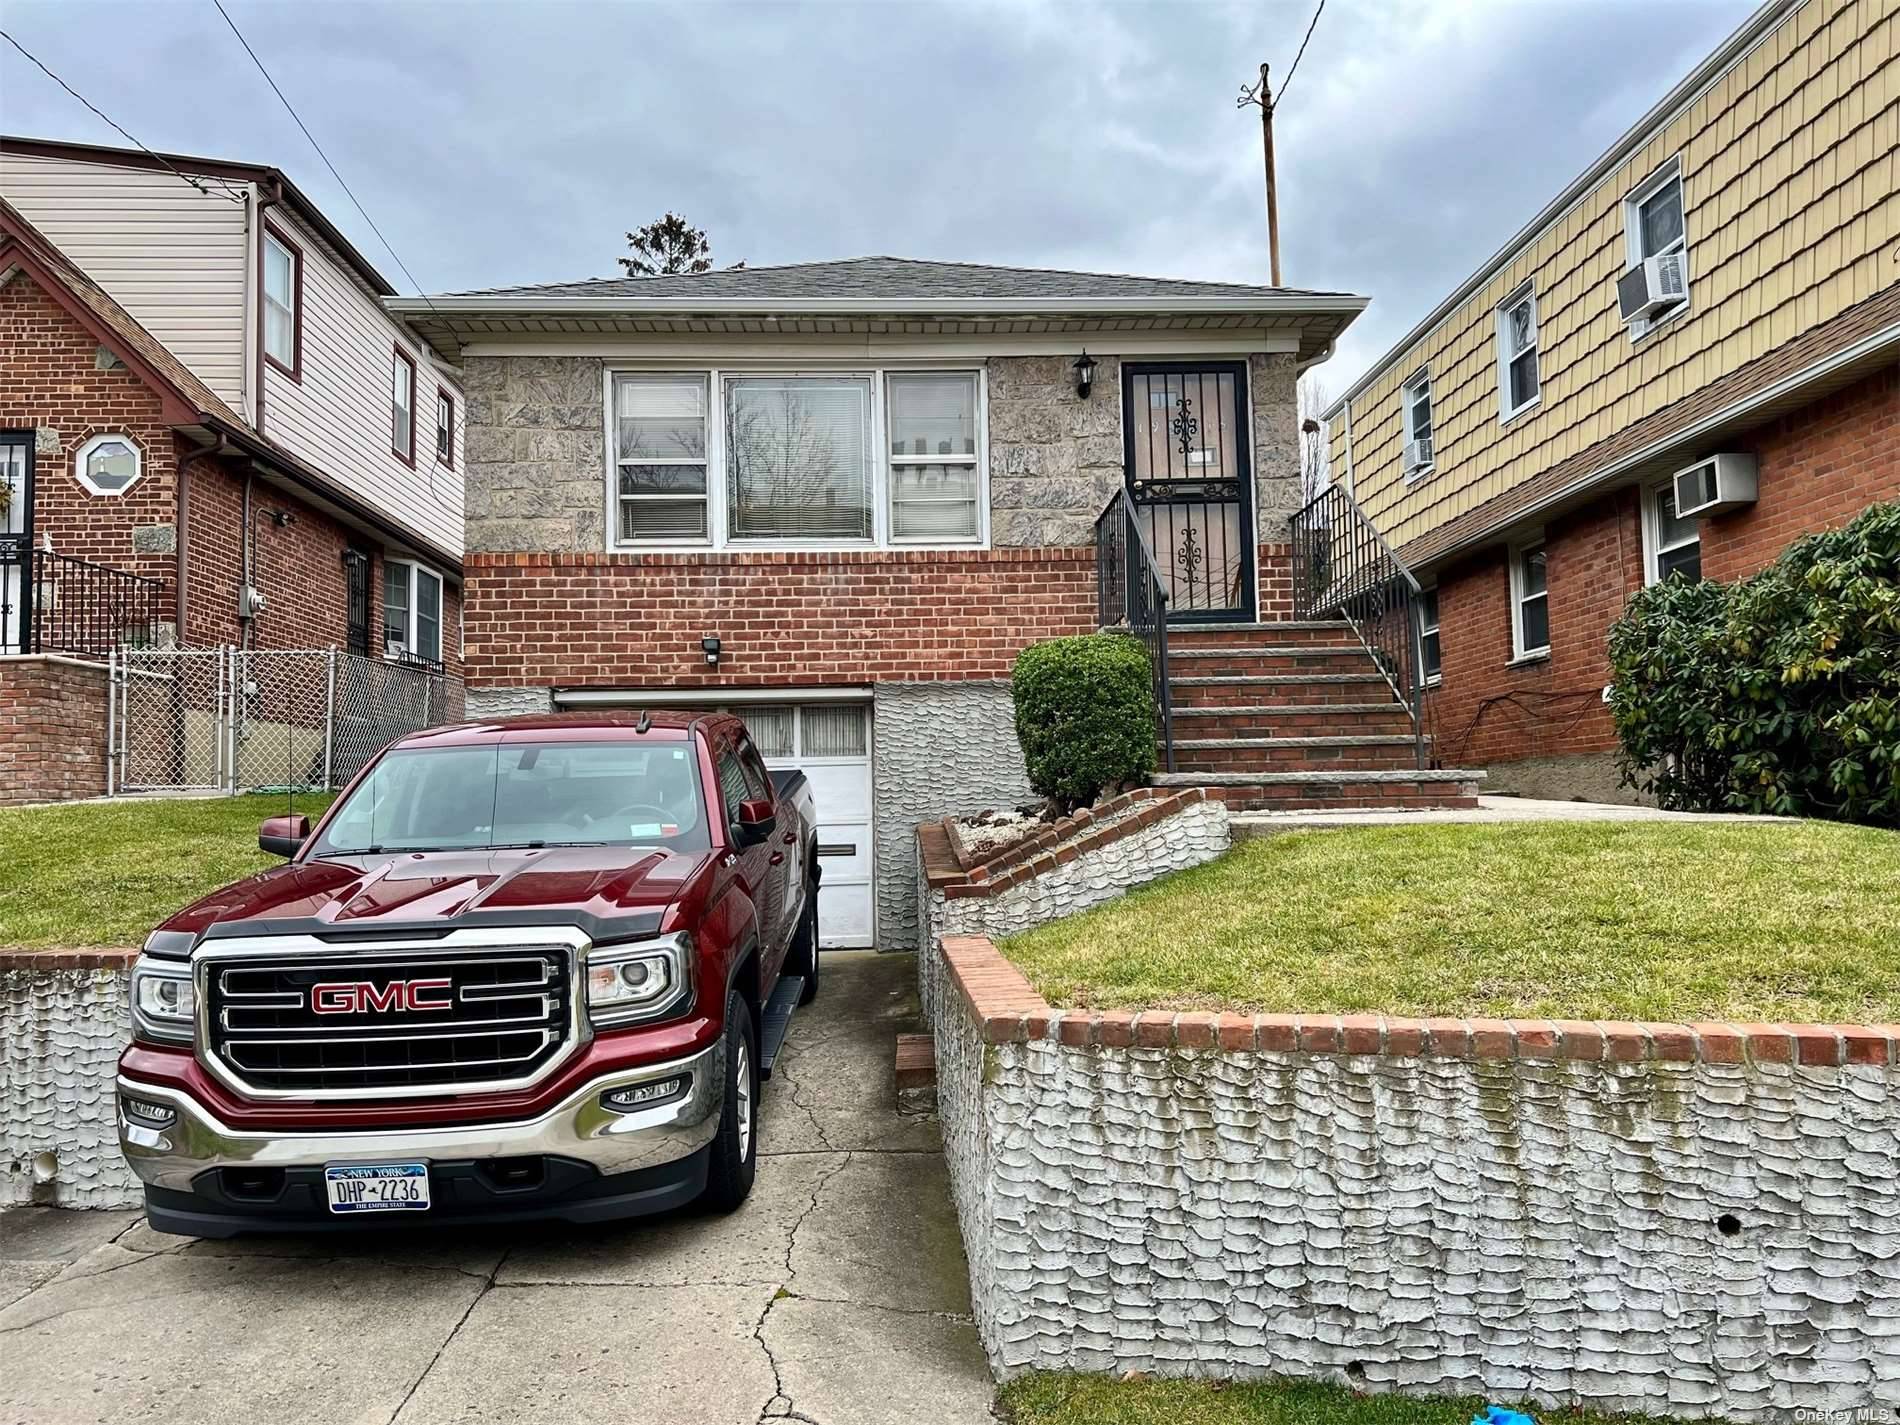 This two bedroom one bathroom home with finished basement, attached garage and private driveway is situated in a premier area of Whitestone.